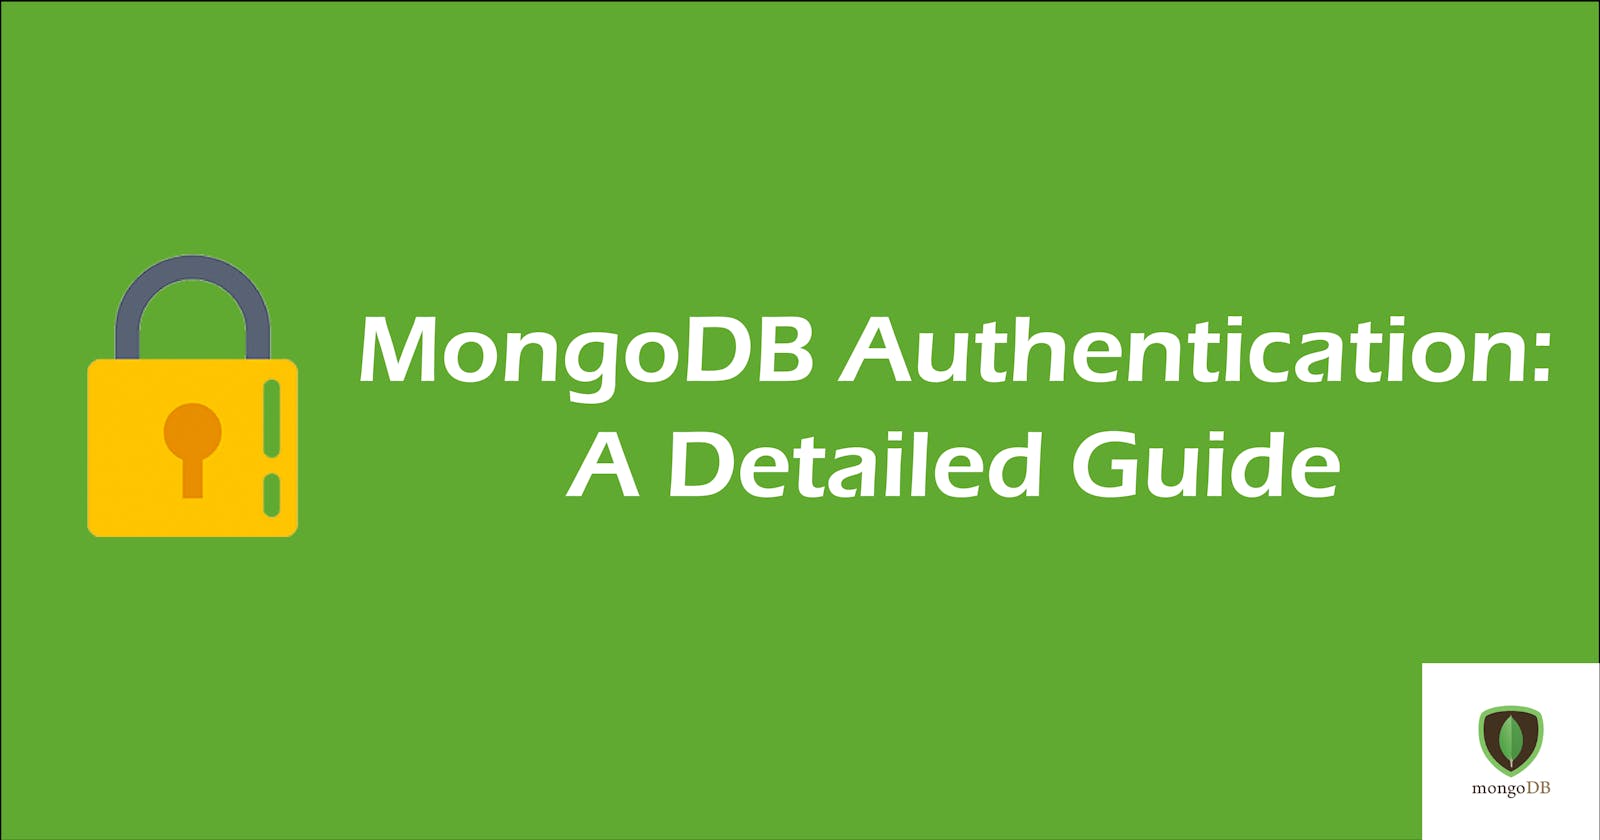 MongoDB Authentication: A Detailed Guide